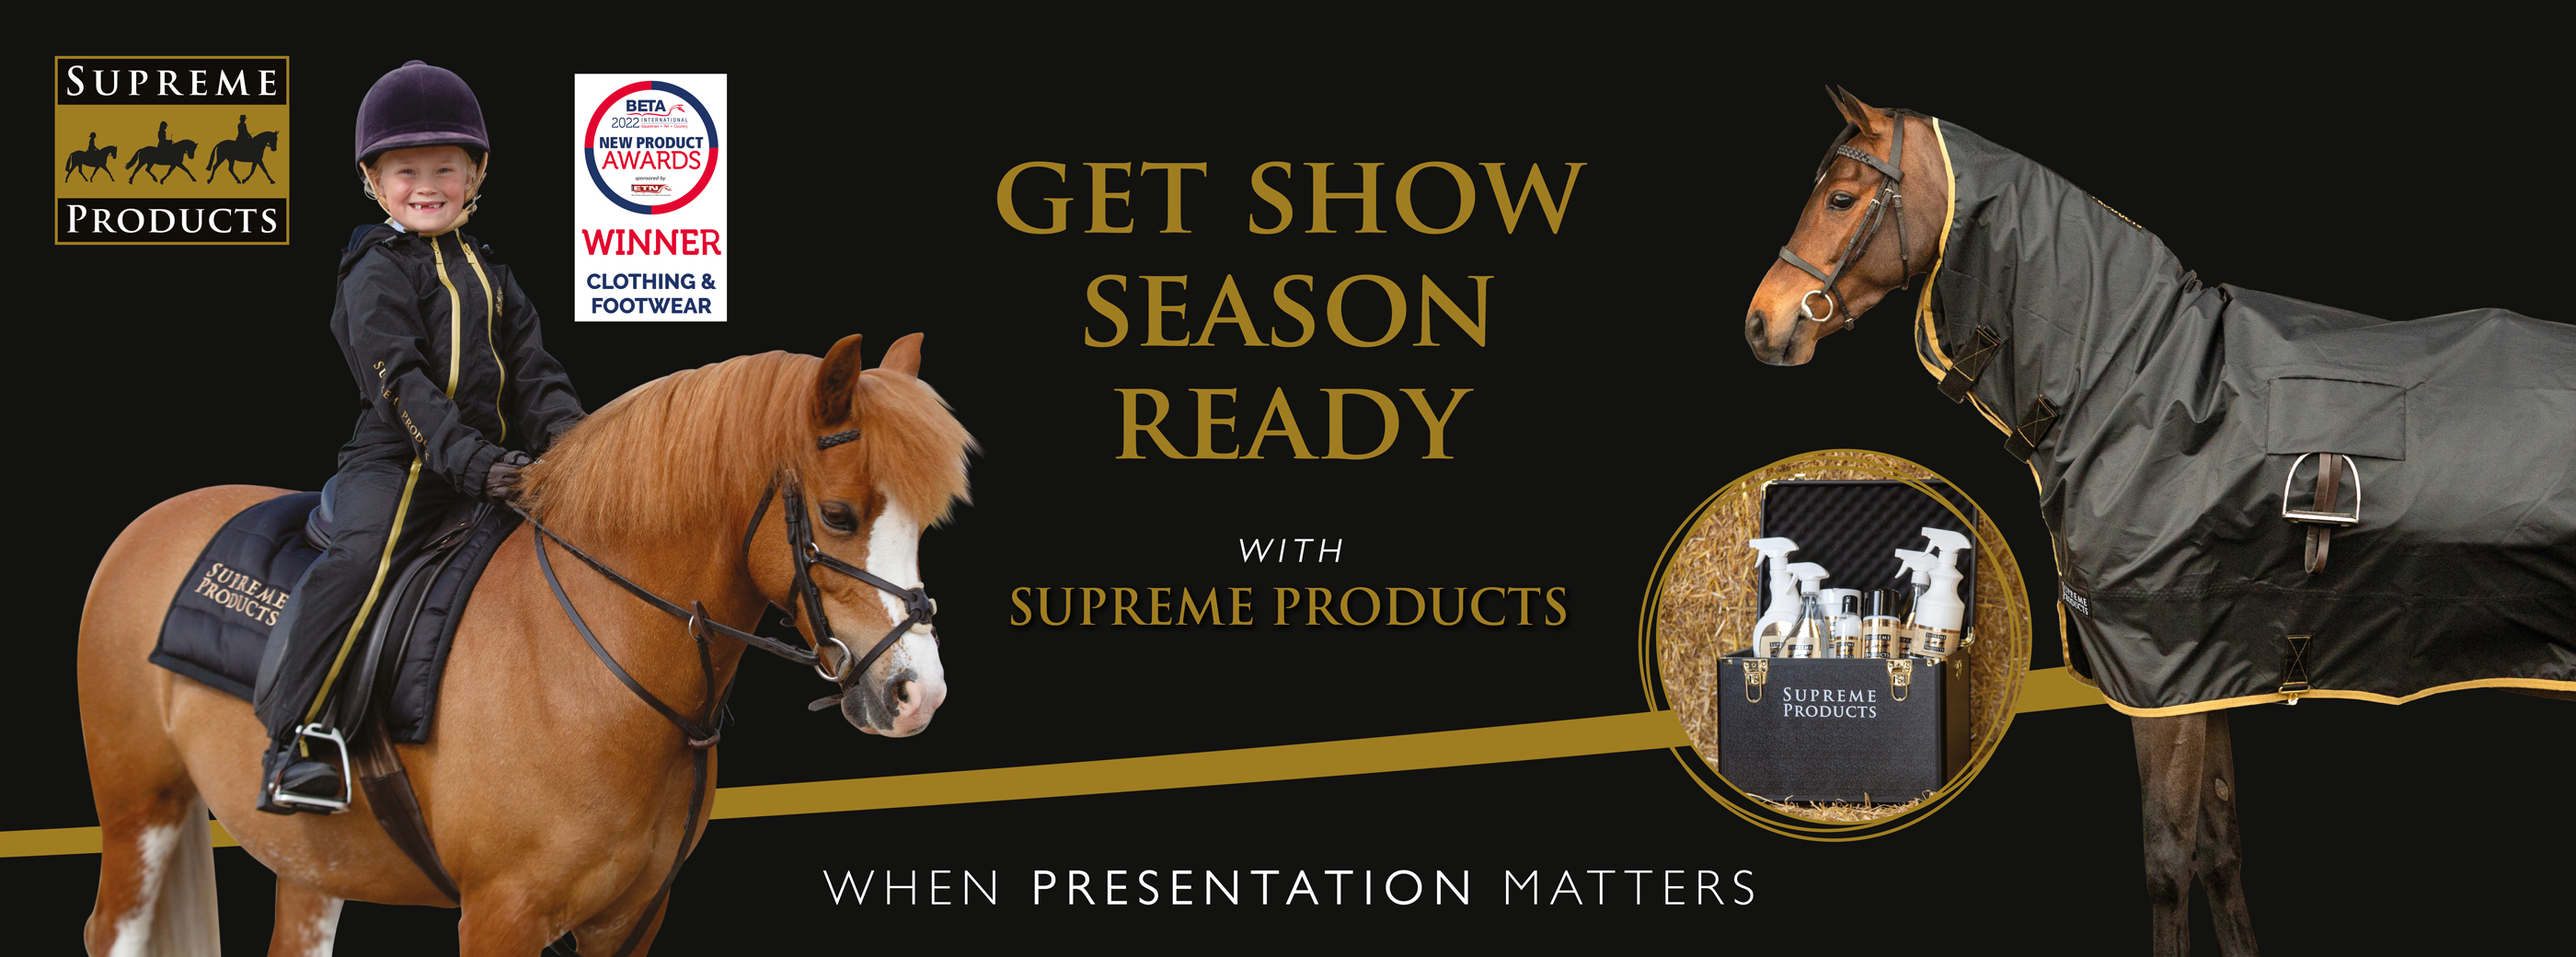 Supreme Products - Get Show Ready